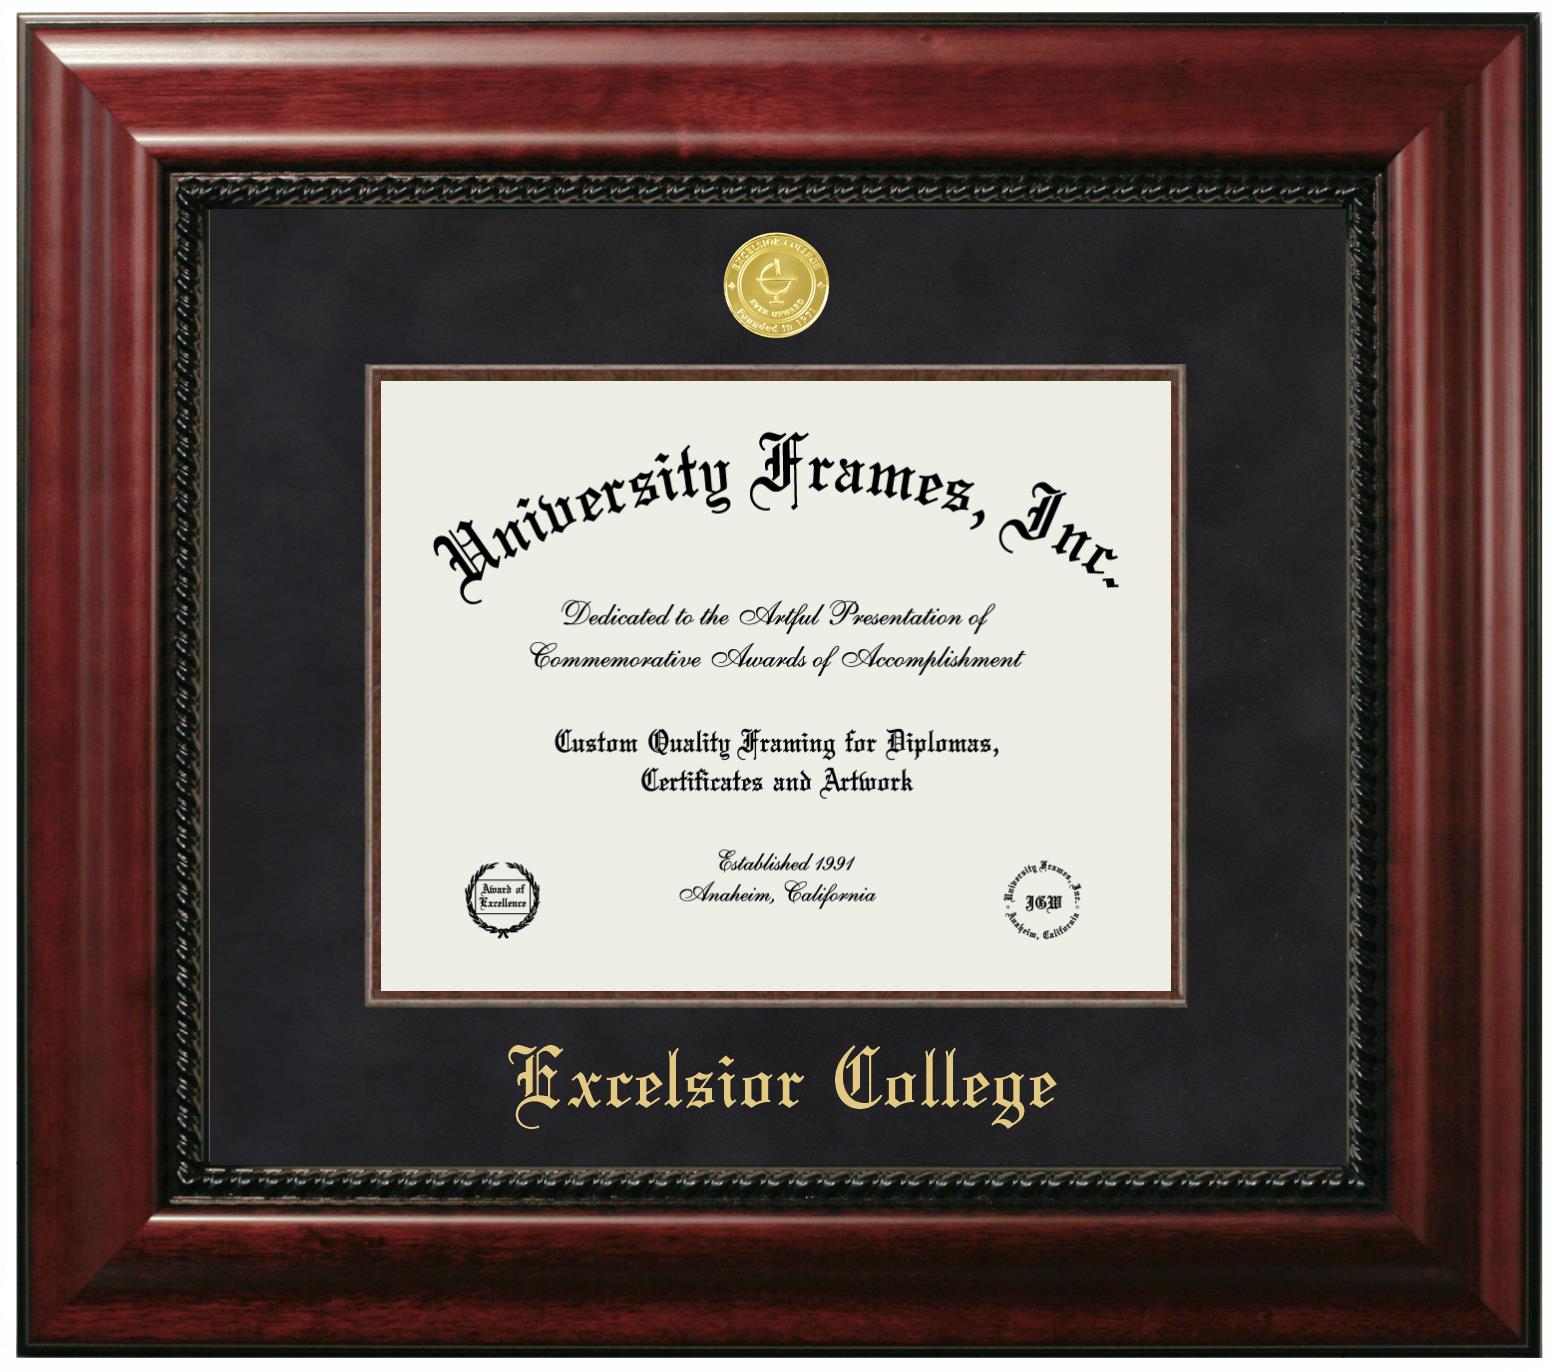 Excelsior College Diploma Frame In Classic Mahogany With Gold Trim With Black Gold Mats